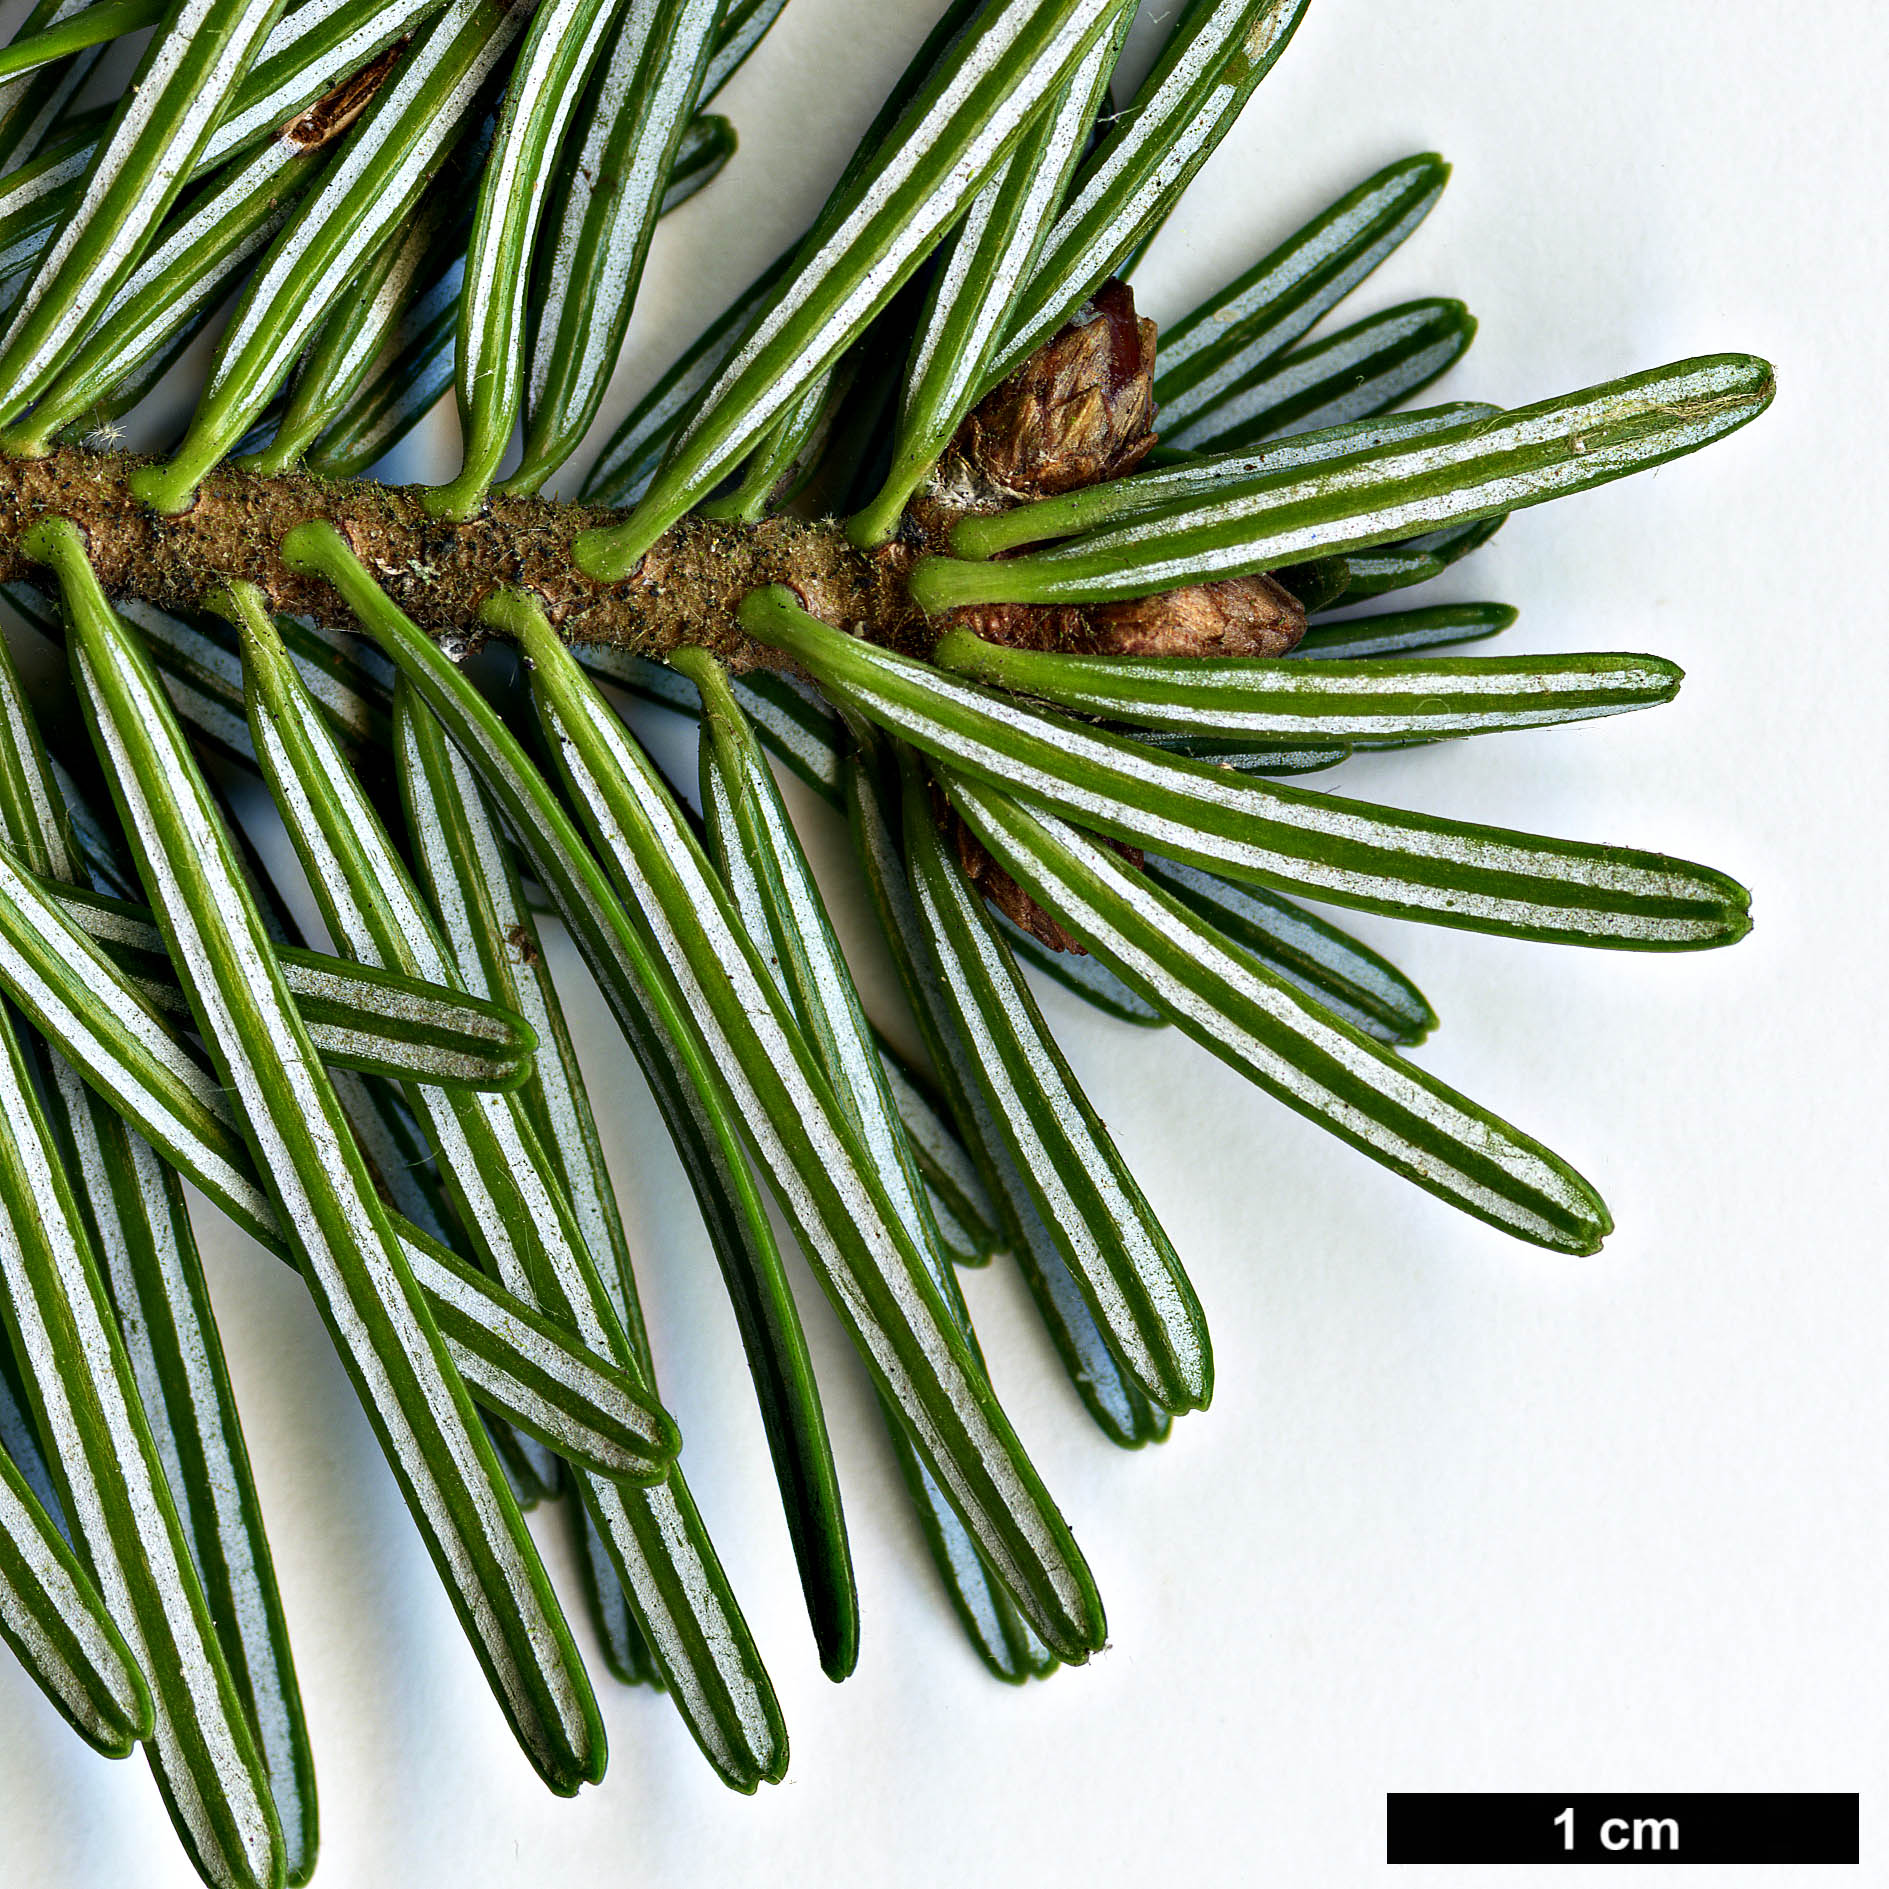 High resolution image: Family: Pinaceae - Genus: Abies - Taxon: nordmanniana